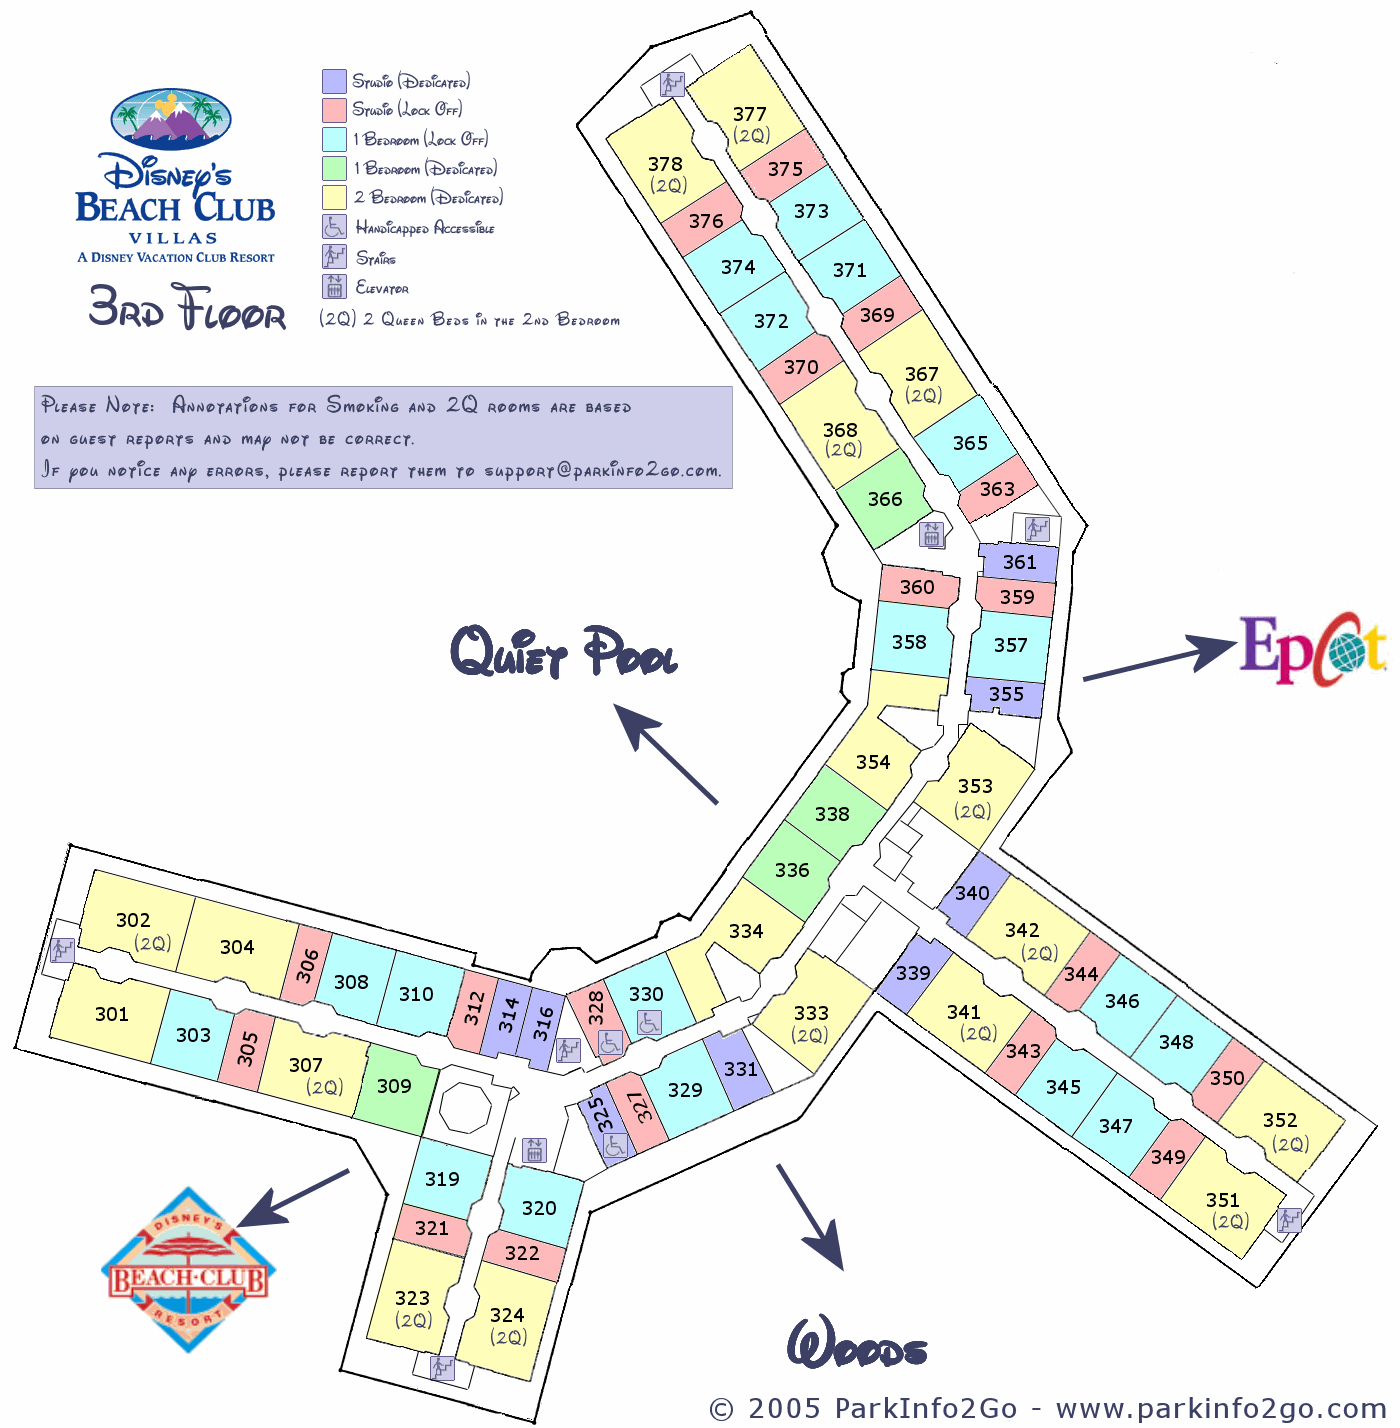 Room locations with #s at Beach Club villas | The DIS Disney Discussion